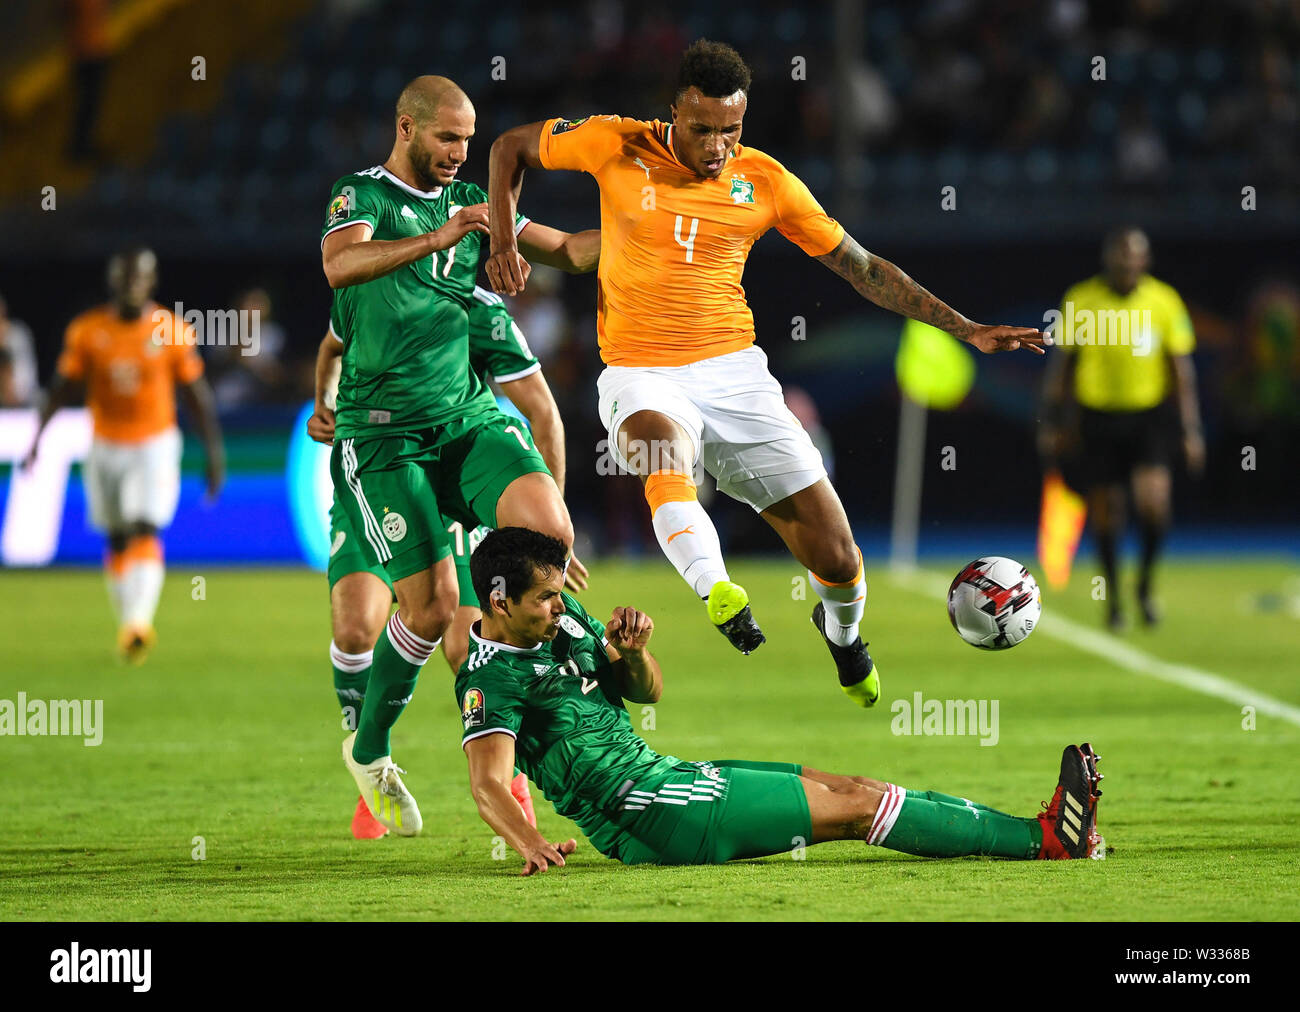 Suez. 11th July, 2019. Jean-Pphilippe Gbamin (up) of Cote d'Ivoire skips Aissa Mandi of Algeria's tackle during the quarterfinal match between Cote d'Ivoire and Algeria at the 2019 Africa Cup of Nations in Suez, Egypt on July 11, 2019. The match ended 1-1 through extra time. Algeria beat Cote d'Ivoire 4-3 in a penalty shootout. Credit: Li Yan/Xinhua/Alamy Live News Stock Photo